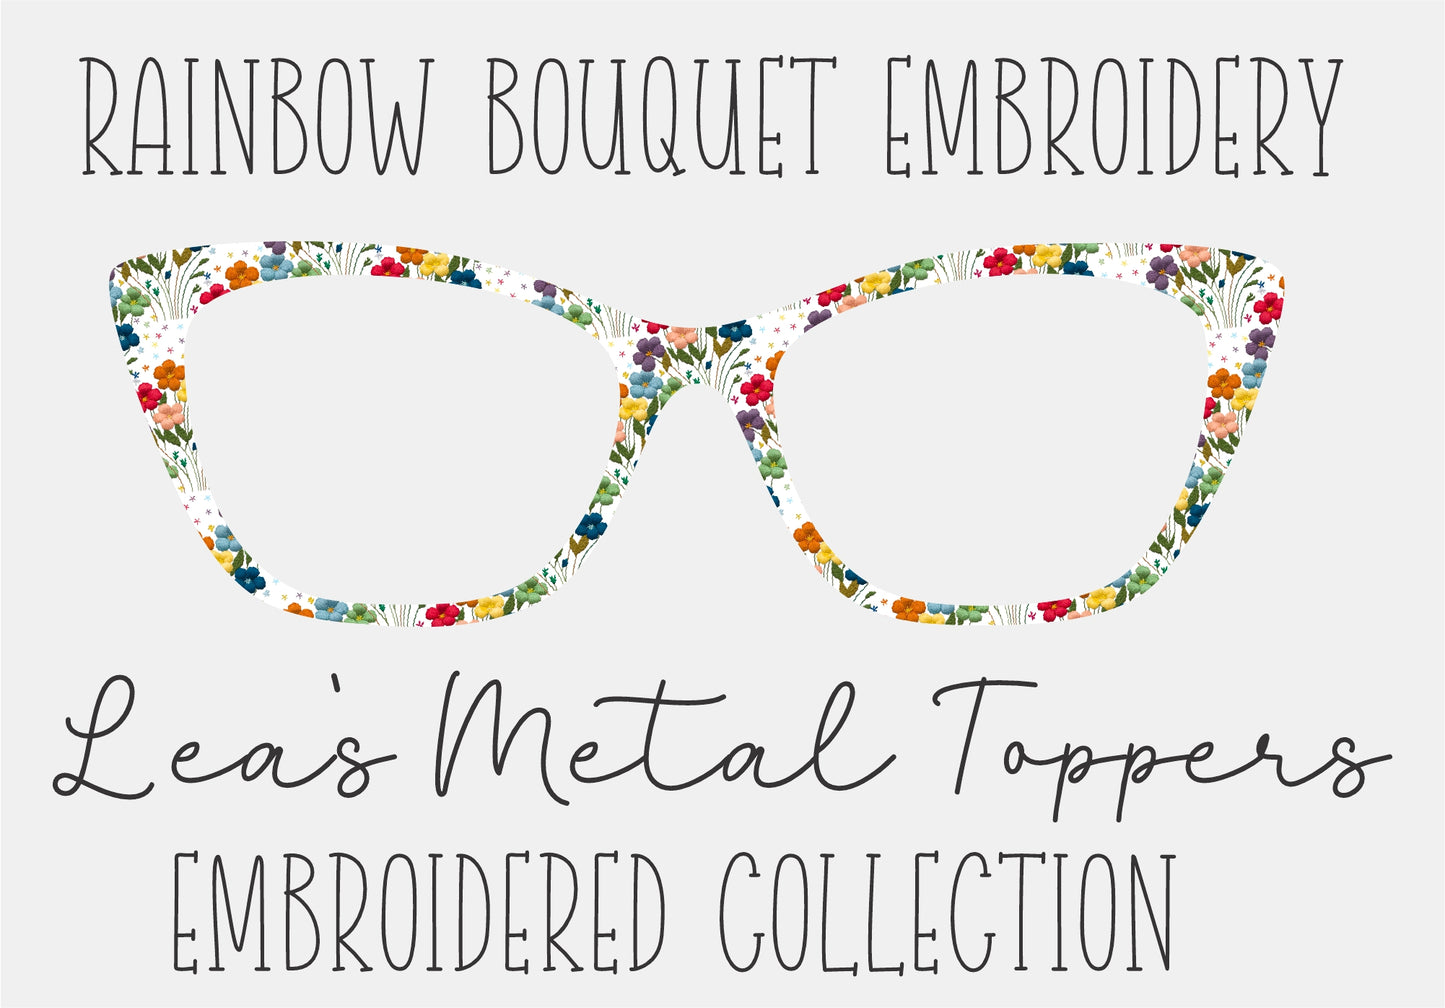 RAINBOW BOUQUET EMBROIDERY Eyewear Frame Toppers COMES WITH MAGNETS